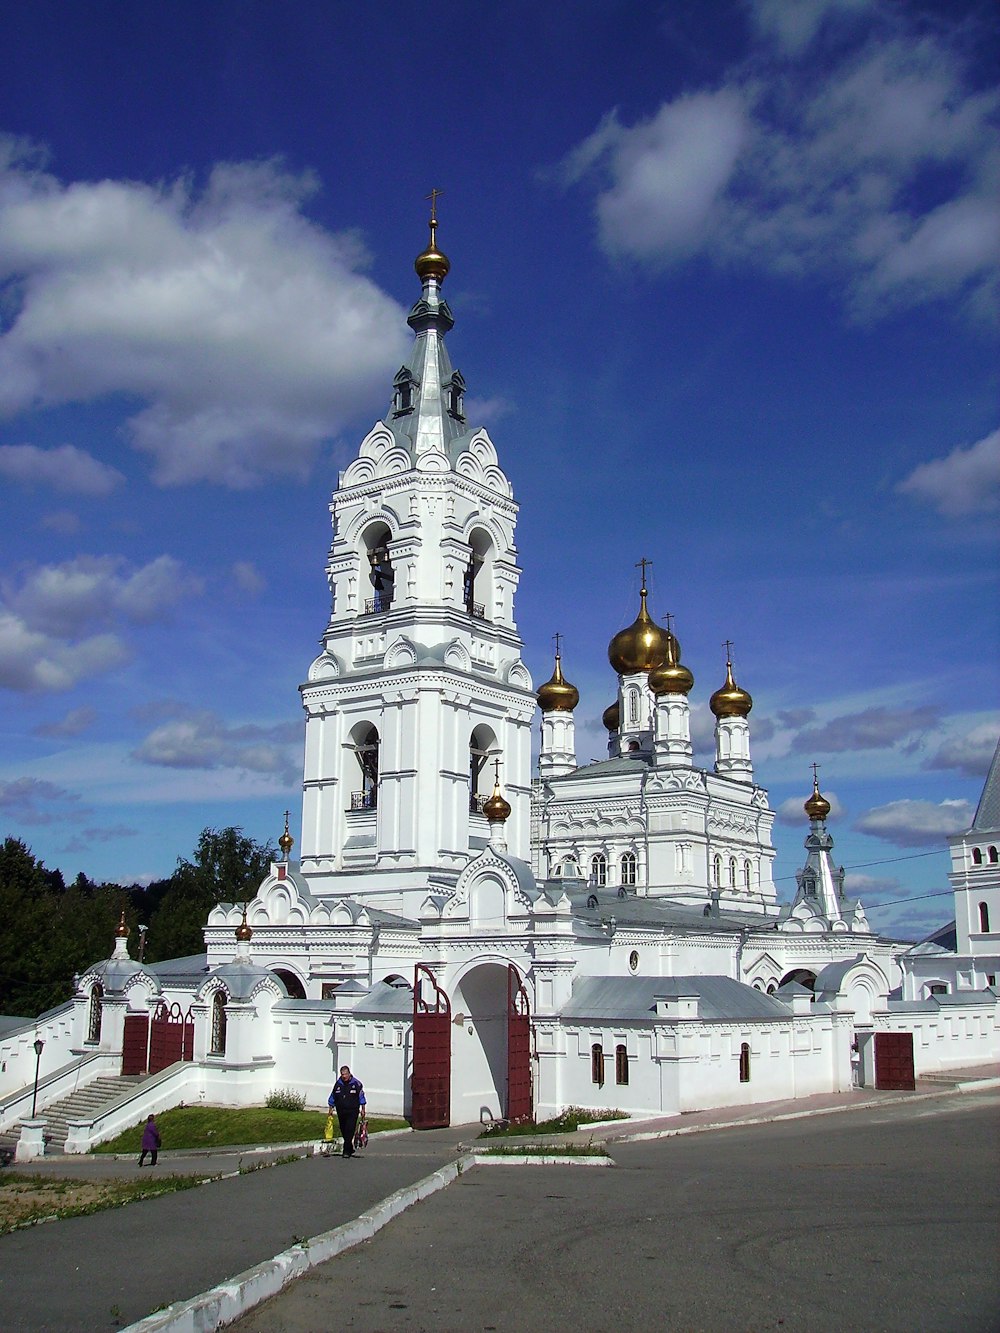 a large white building with gold domes under a blue sky